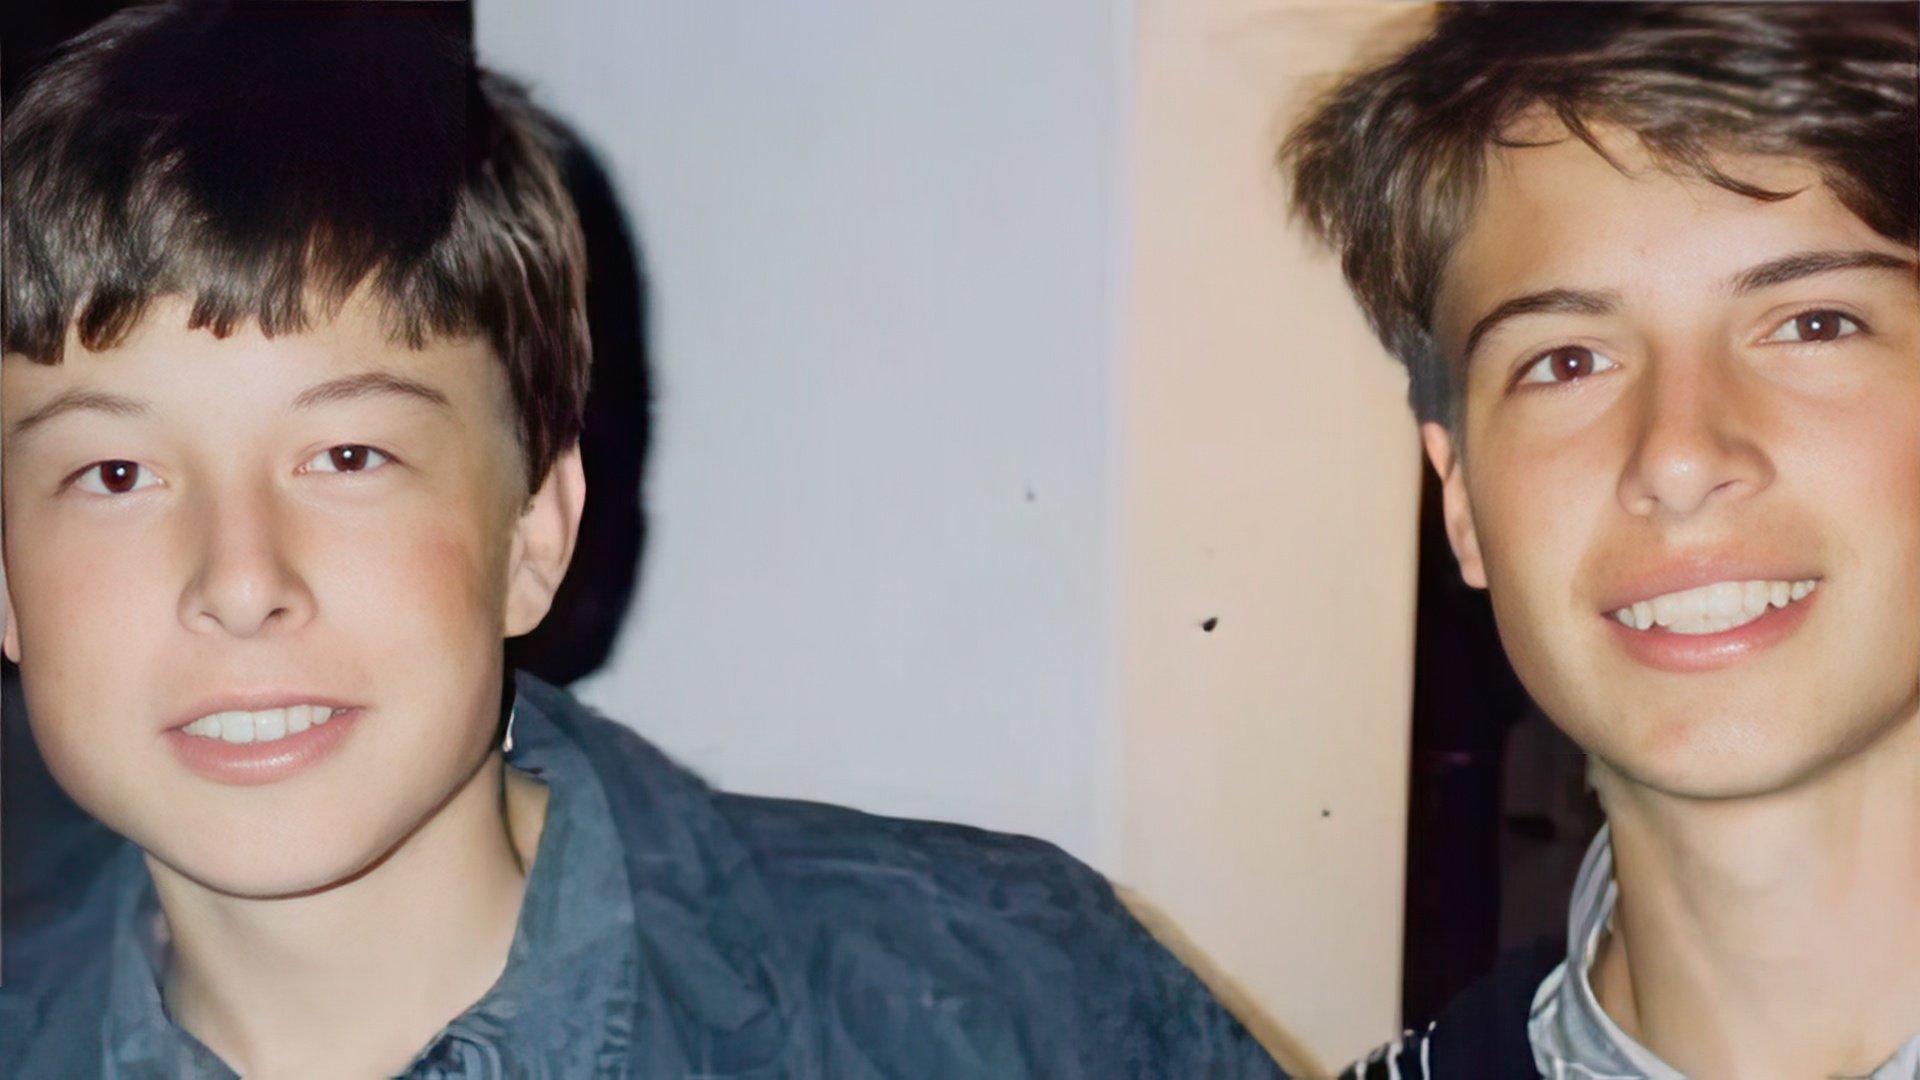 In his youth, Elon Musk (on the left) was a shy child